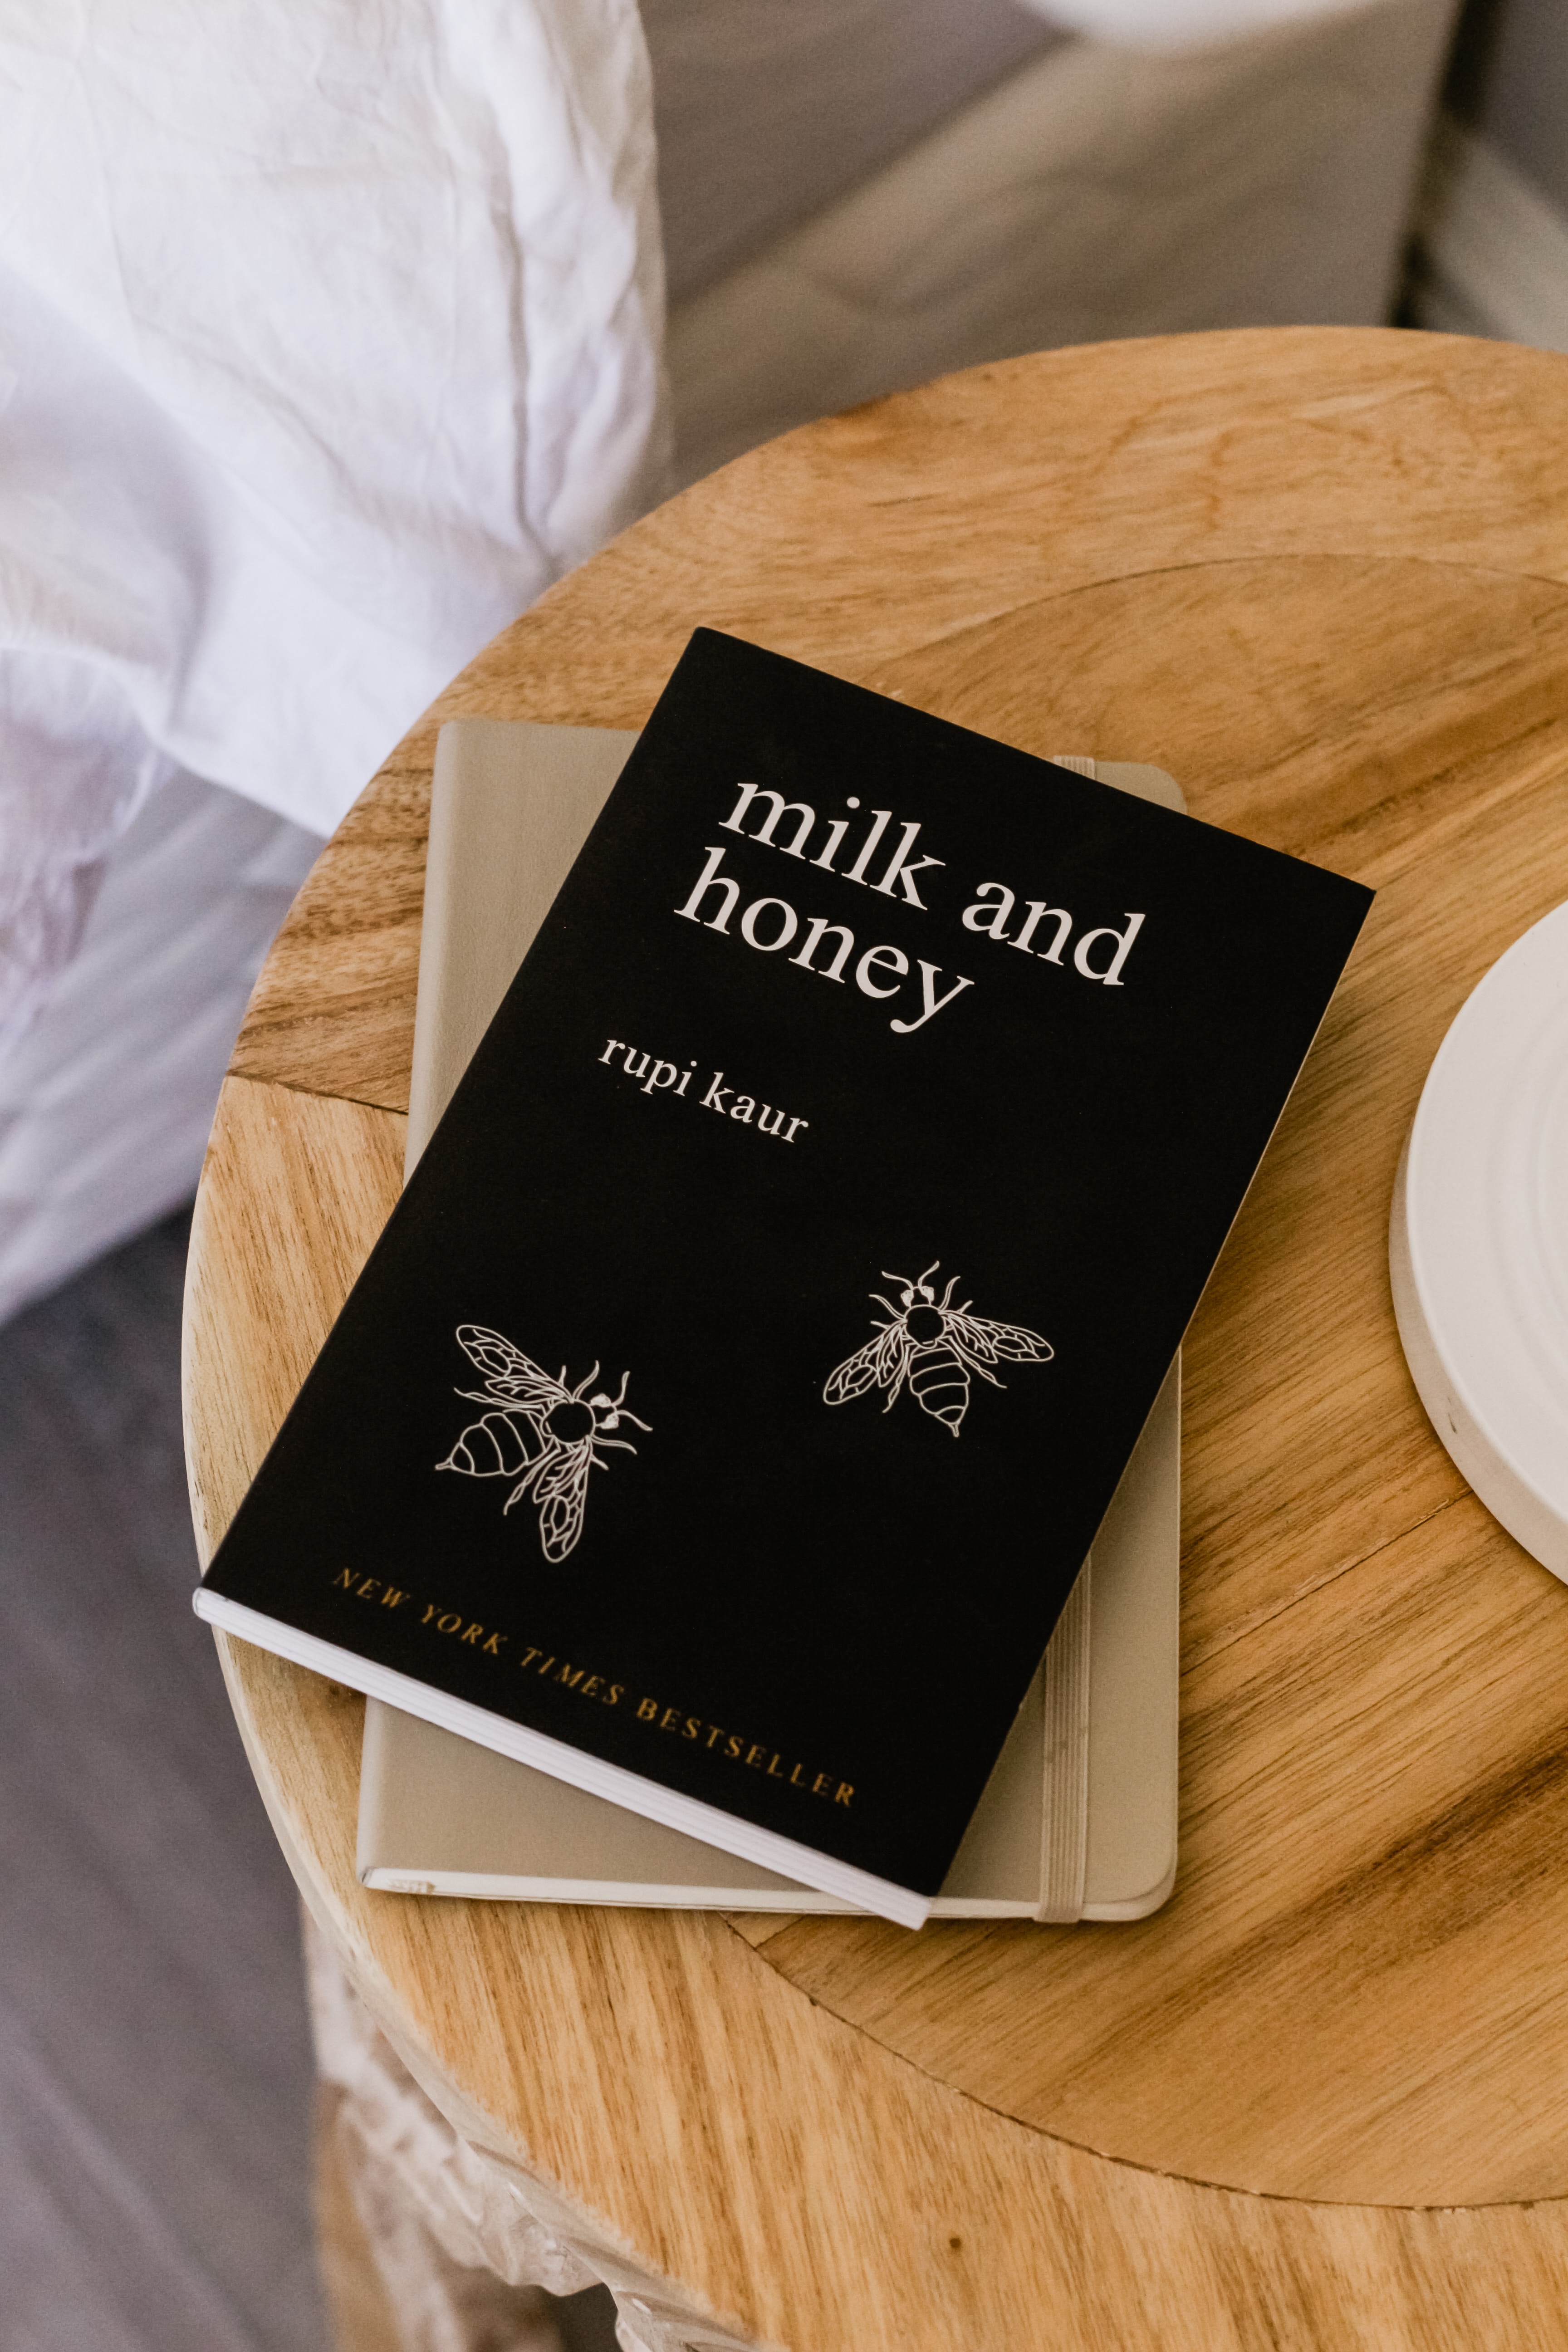 Milk and Honey book on table